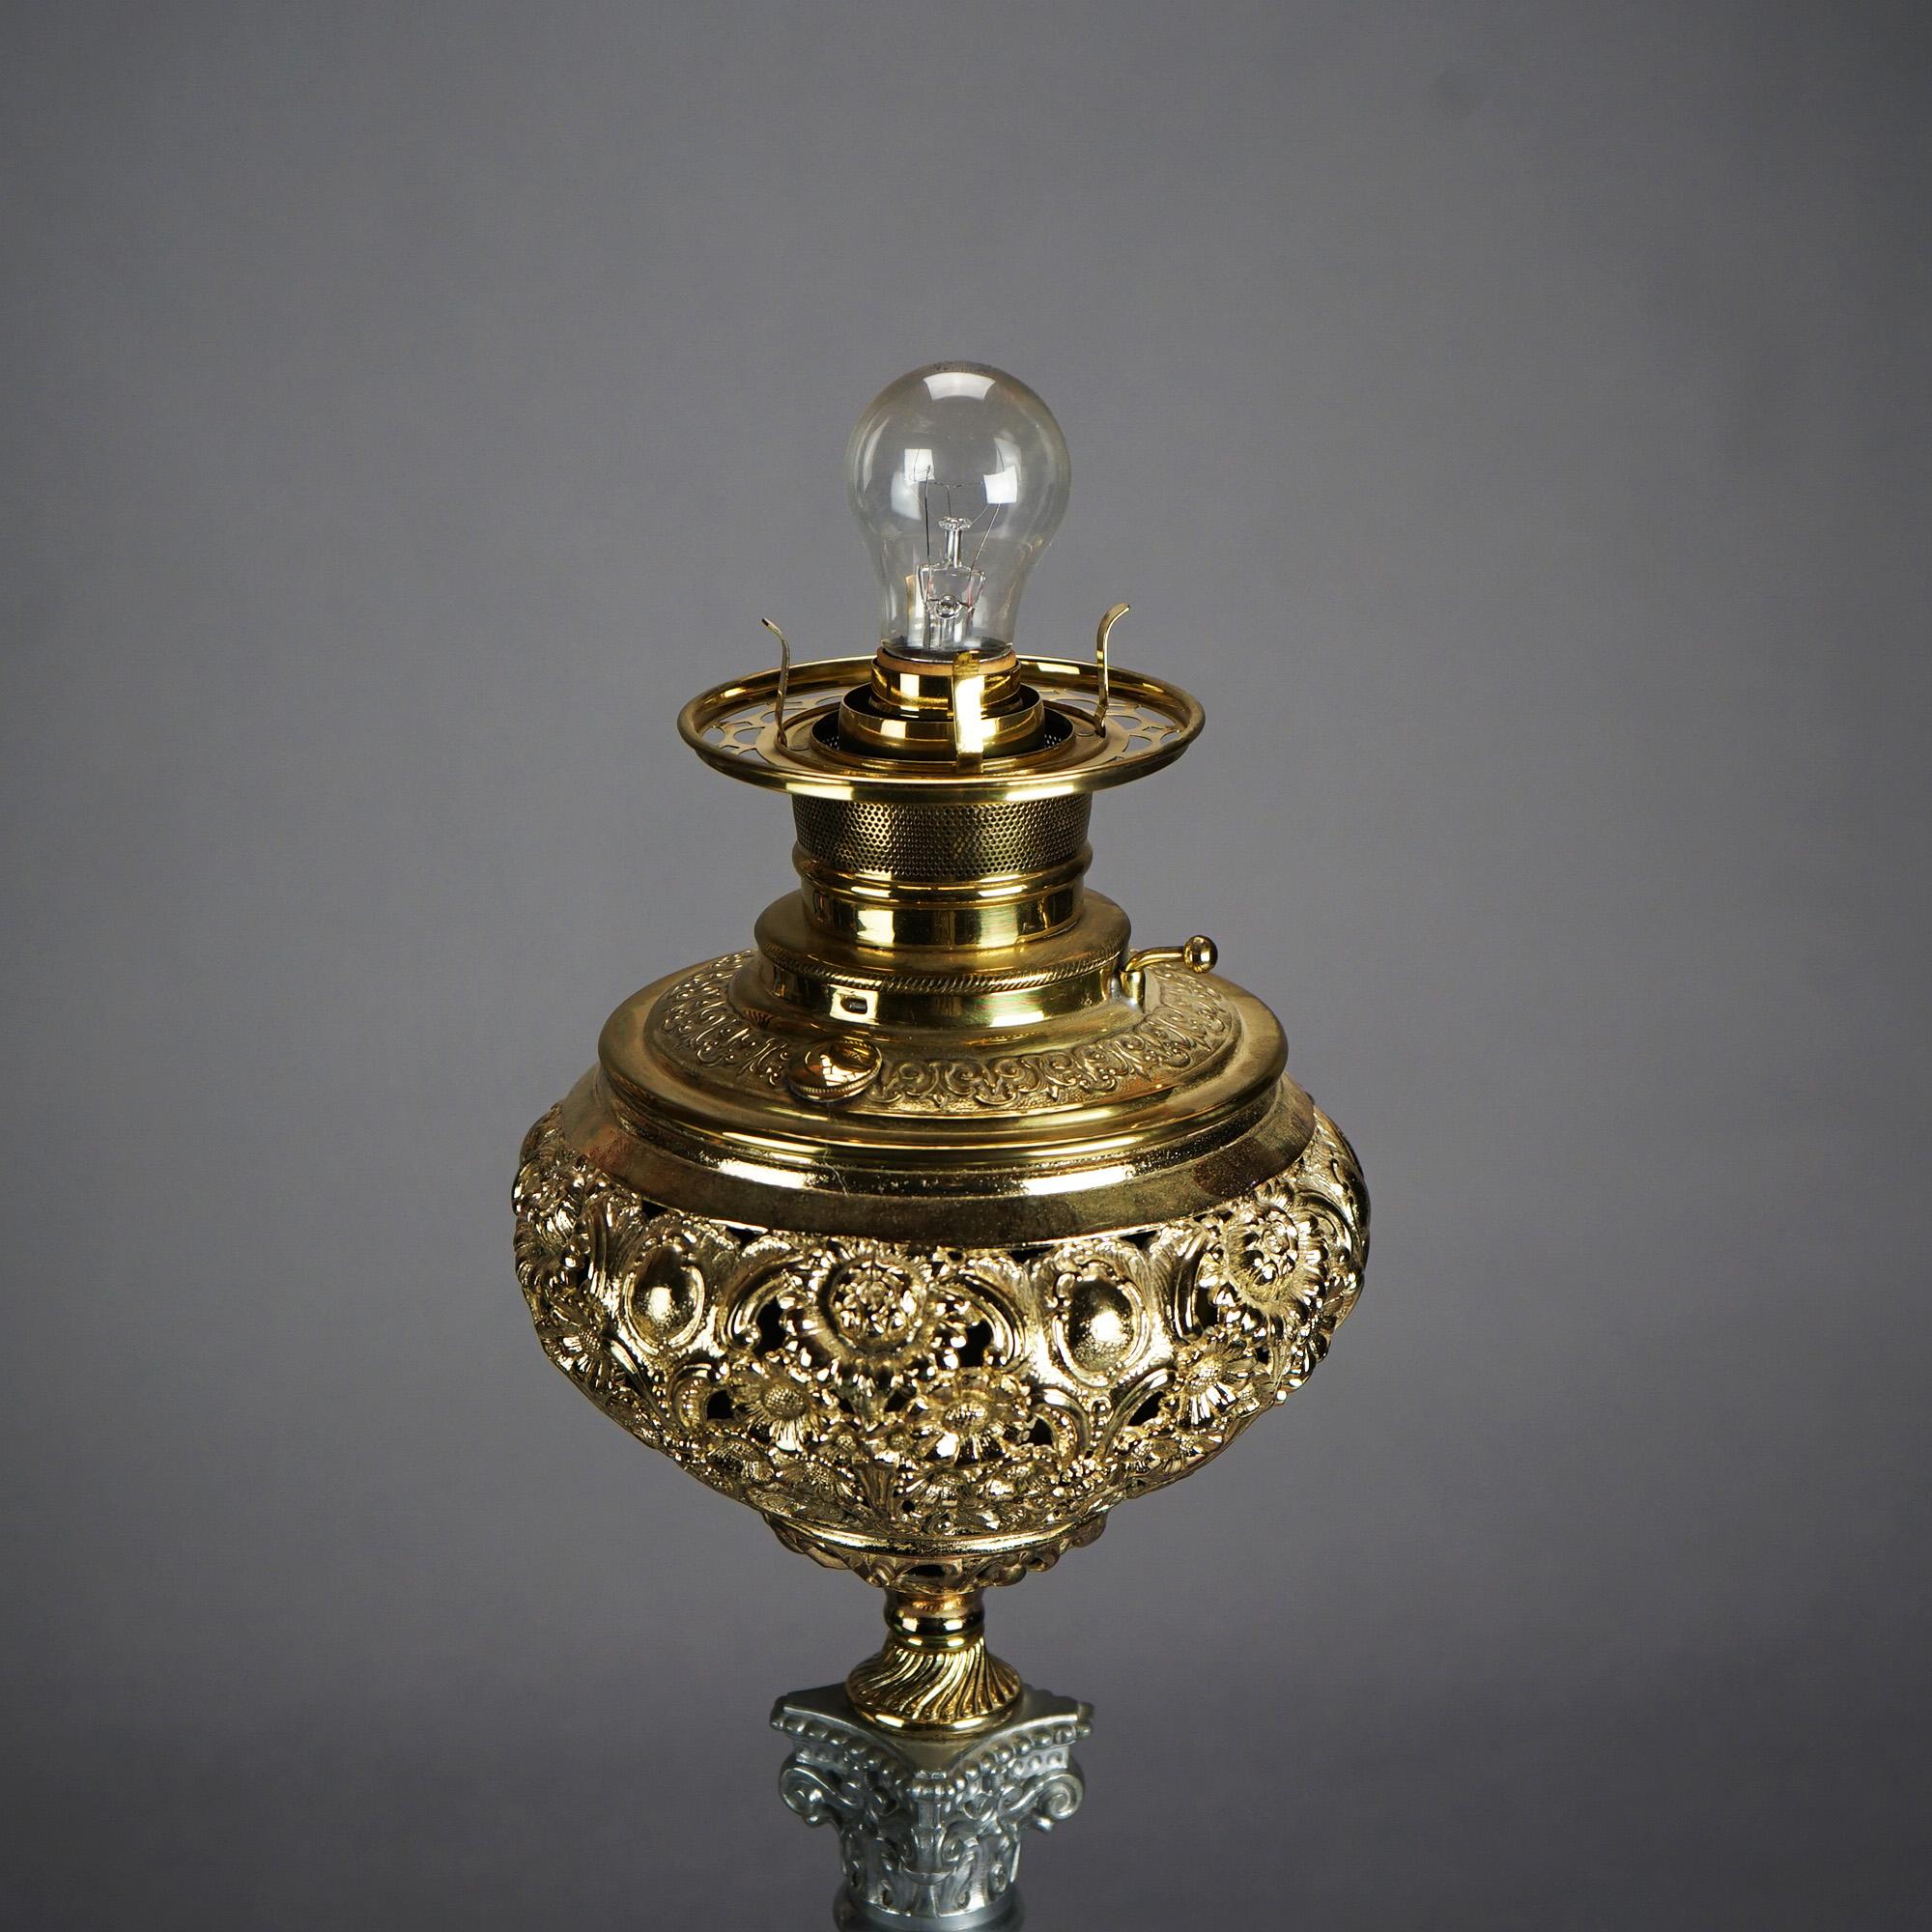 Antique Gilt Metal & Onyx Victorian Parlor Lamp & Hand Painted Shade, c1890 For Sale 7